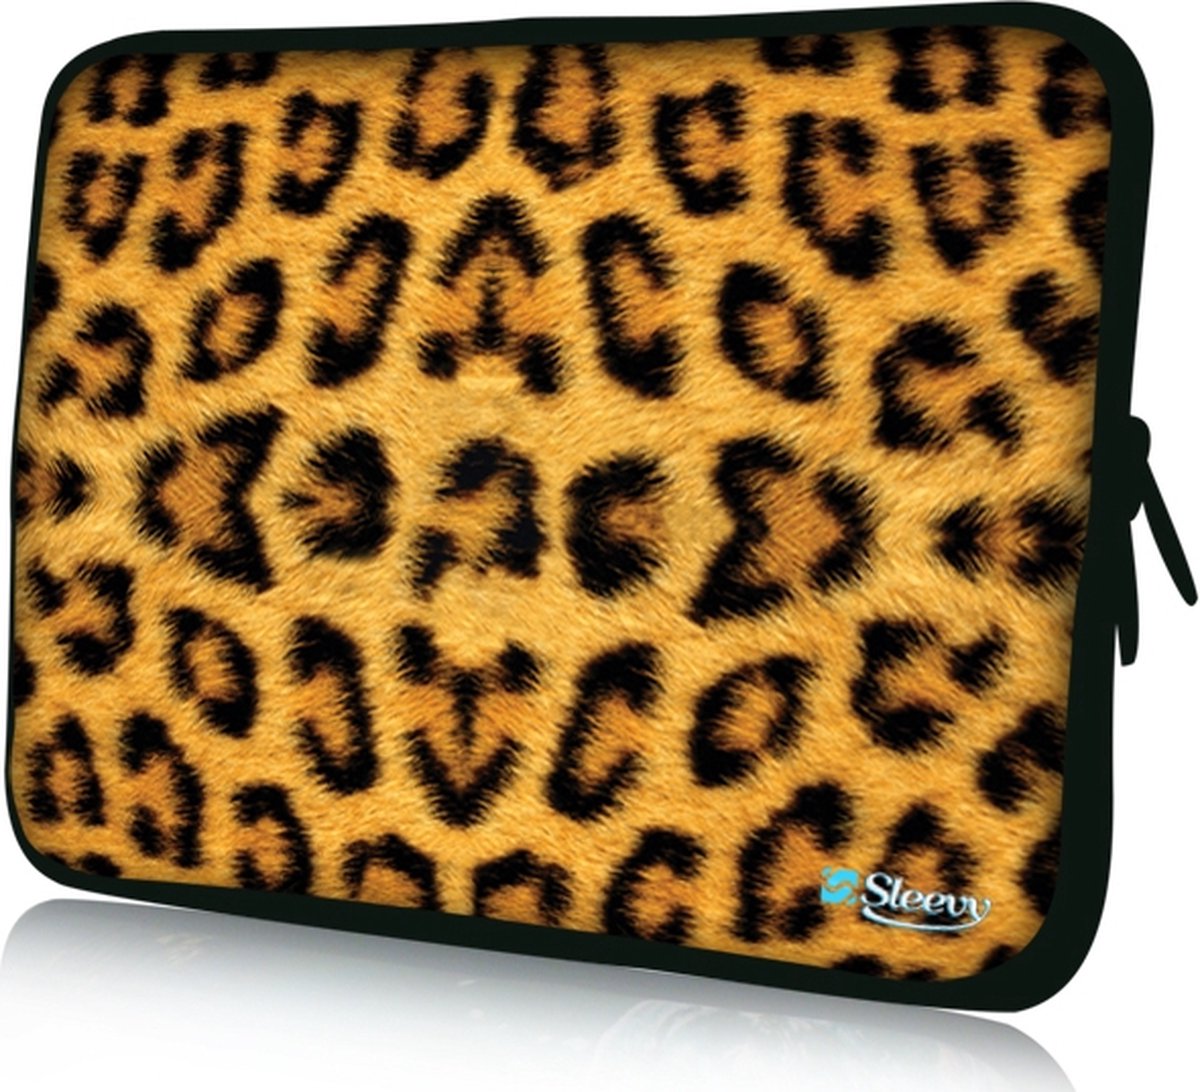 Sleevy 13,3 inch laptophoes luipaard print - laptop sleeve - Sleevy collectie 300+ designs